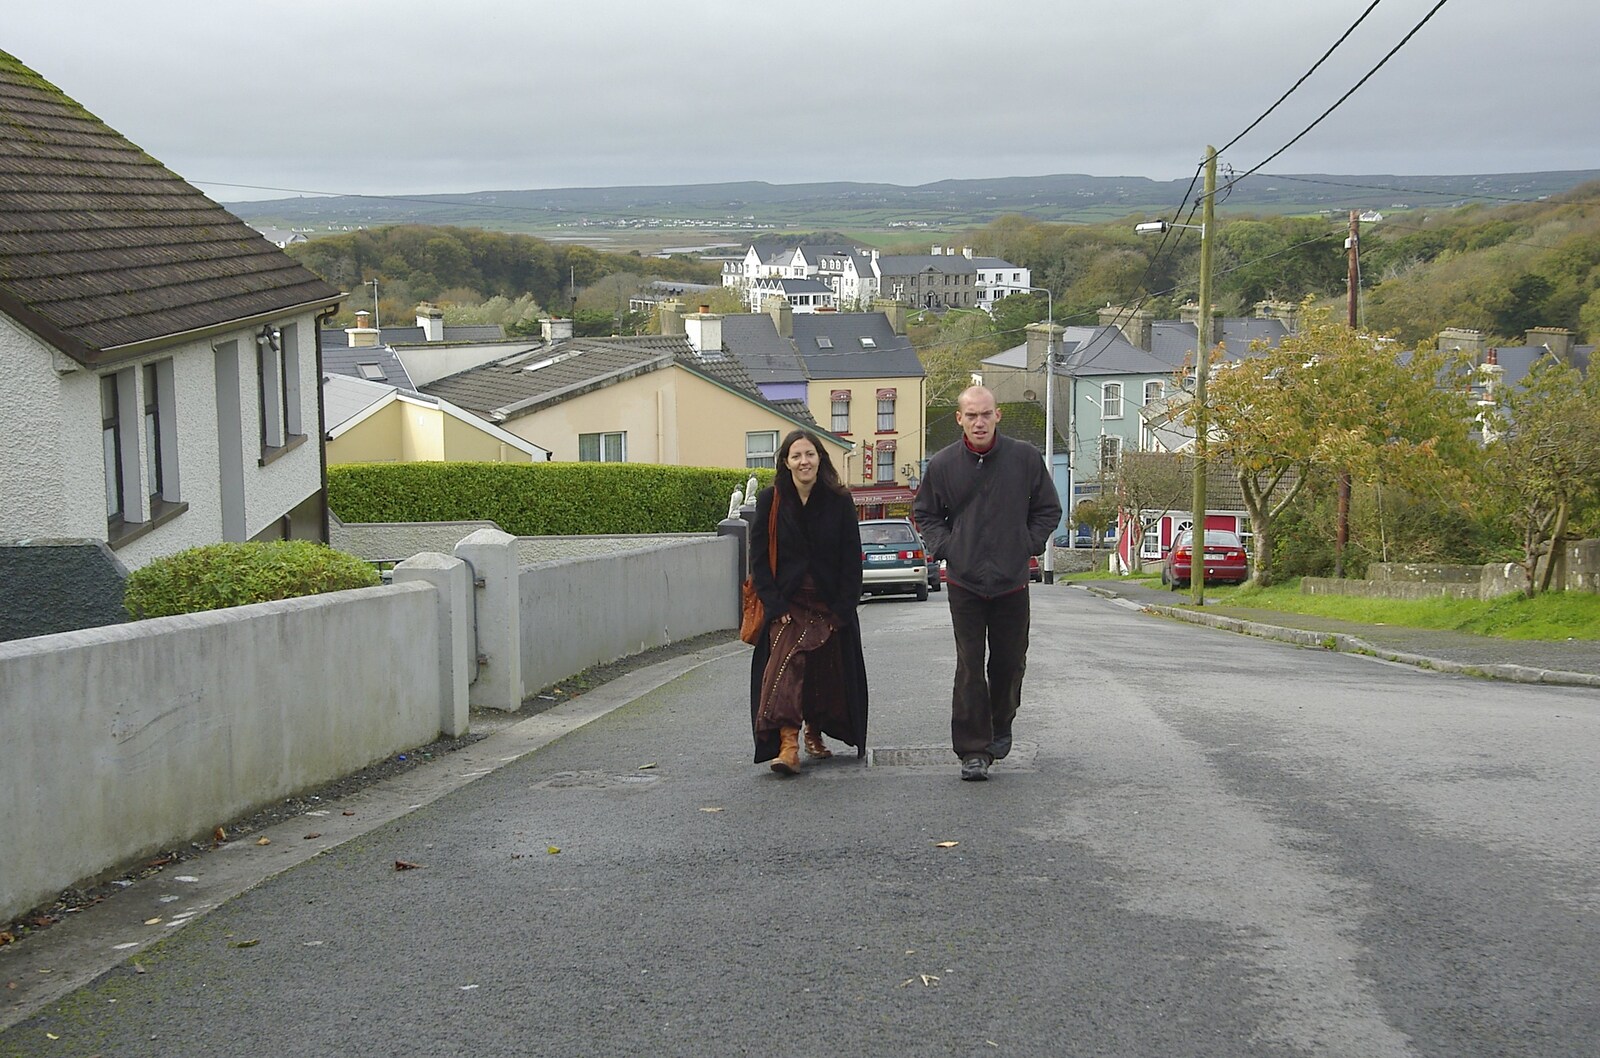 Walking up that hill from Corofin, Ennistymon and The Burran, County Clare, Western Ireland - 27th October 2006